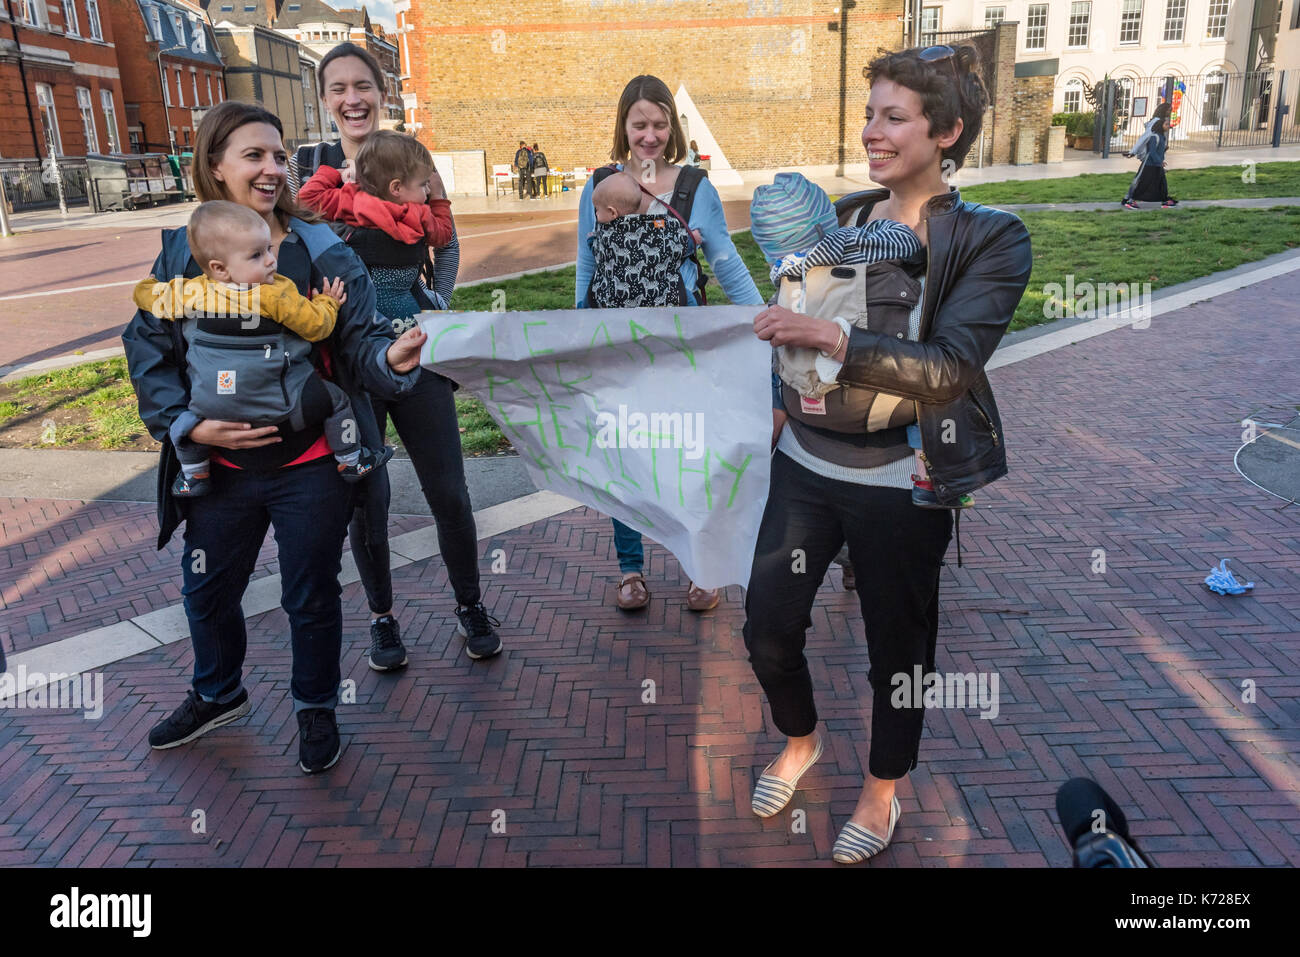 London, UK. 14th September 2017. Mothers carry young children at Windrush Square before the 'Stop Killing Londoners' protest against London's excessive air pollution, due mainly to traffic. They walked to the crossing at Brixton Underground station, walking onto the pedestrian crossing and stopping traffic. The air on the Brixton Road breaches the annual pollution limit in only 5 days, roughly 70 times the limit per year. Toxic air pollution results in 10,000 premature deaths in London each year and is particularly harmful to the elderly and the very young. To cut the disruption to traffic the Stock Photo